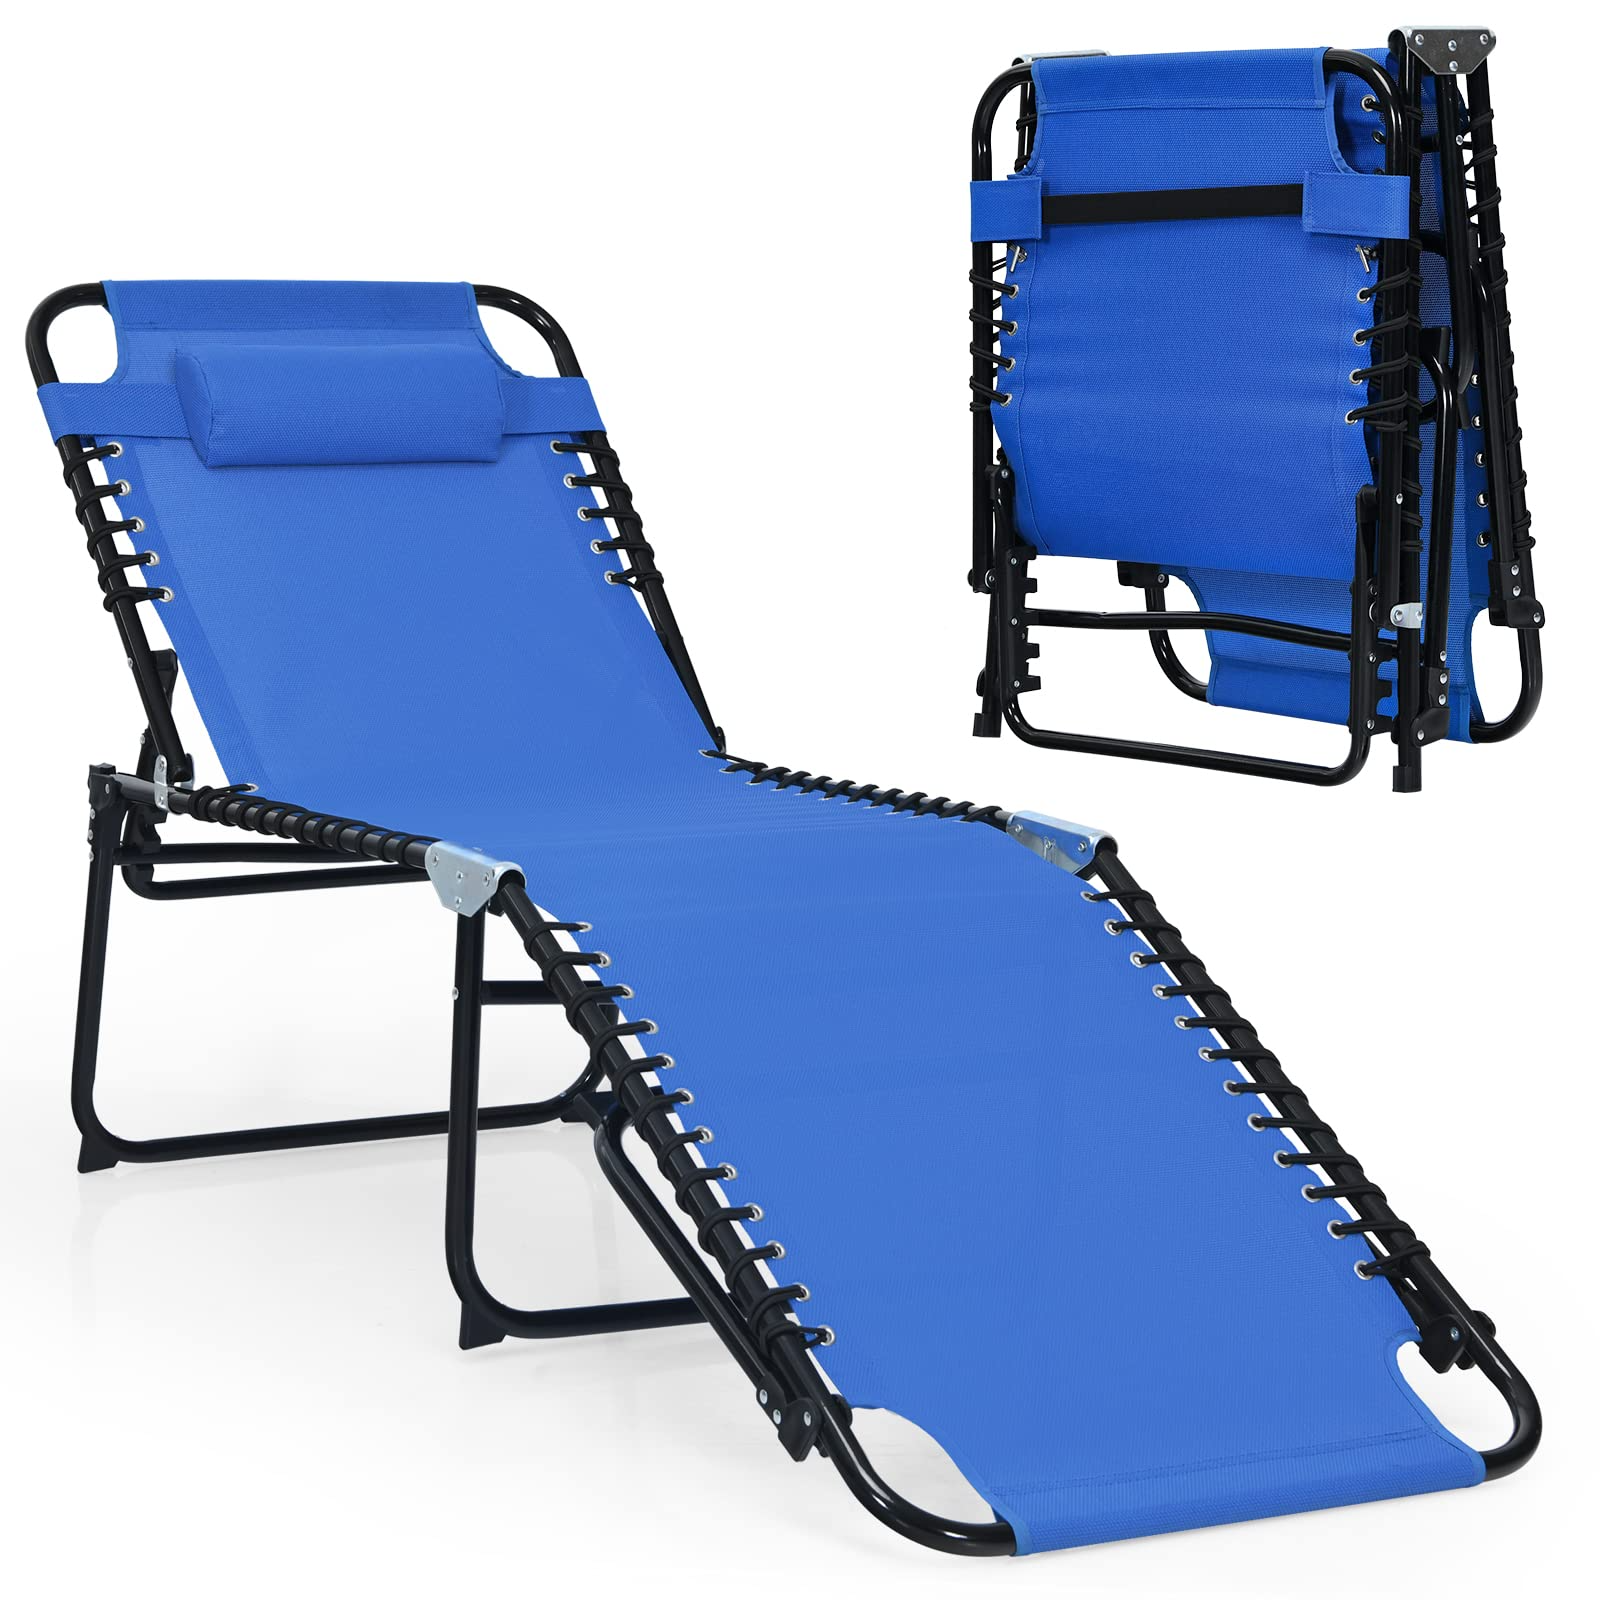 Outdoor Chaise Lounge Adjustable Sunbathing Seat W/Pillow